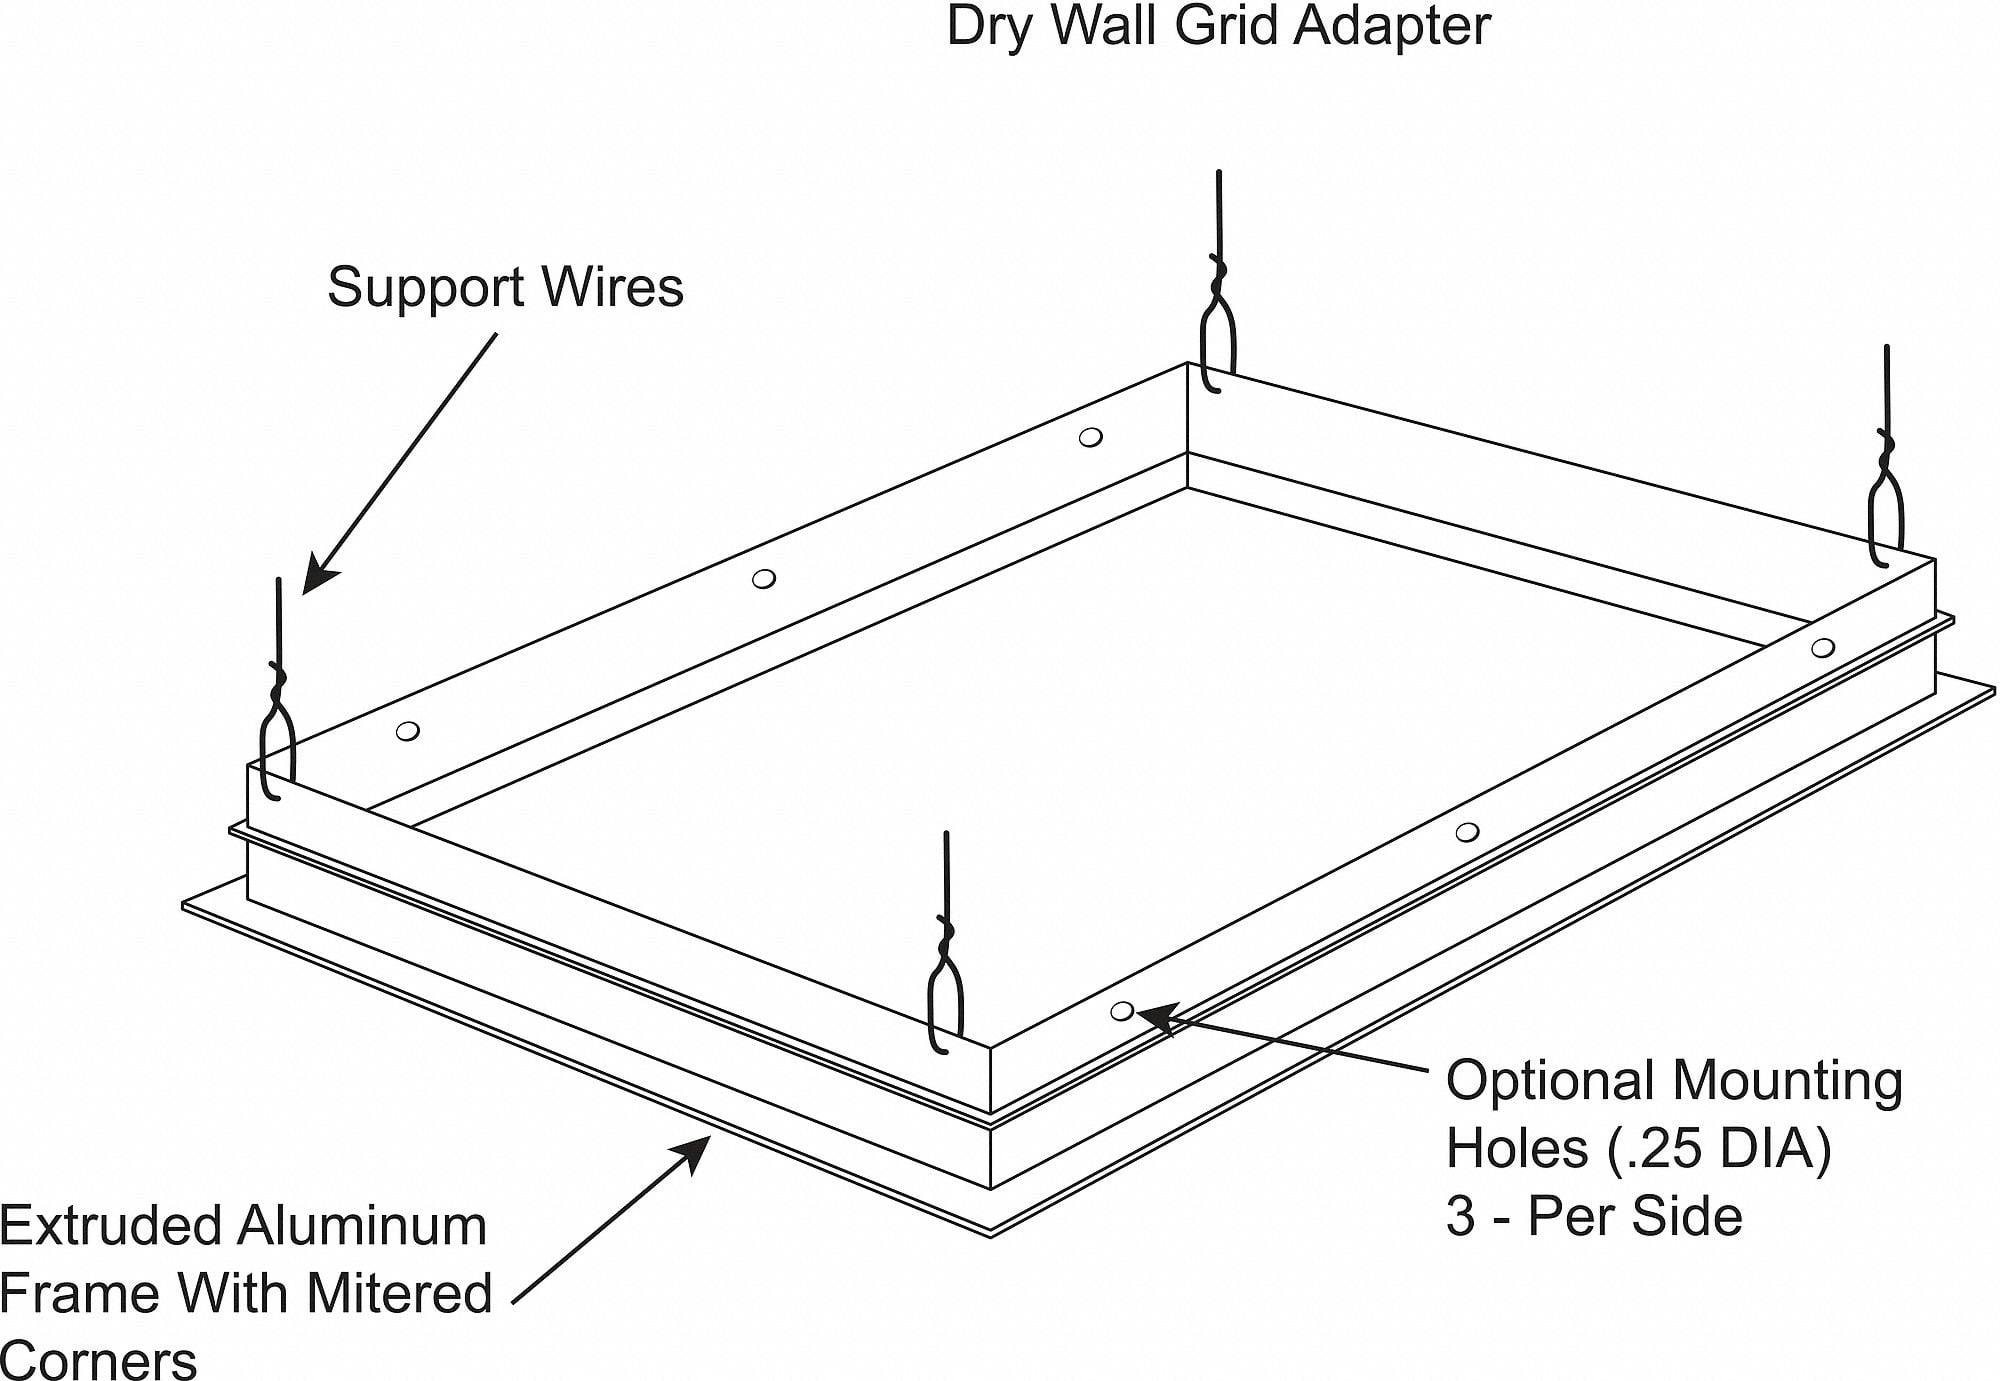 Acrylic White Drywall Grid Adapter Kit for 2x2 ft Troffer